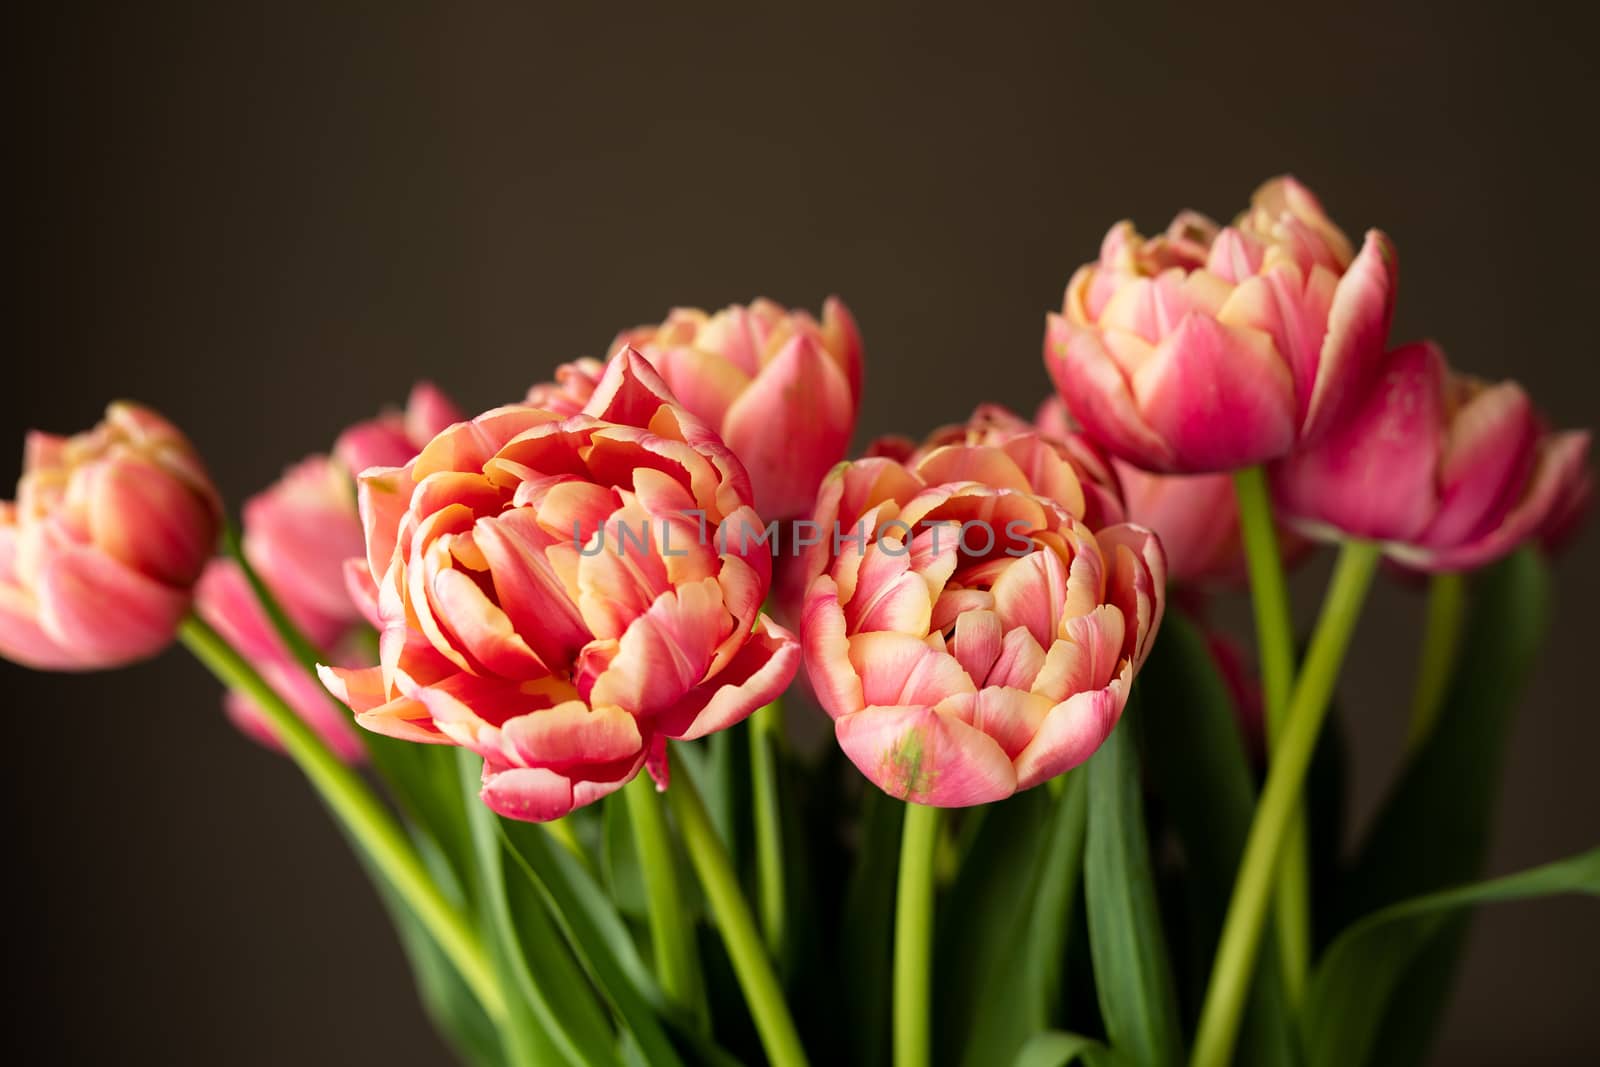 Red and yellow parrot tulips on grey background by mkenwoo